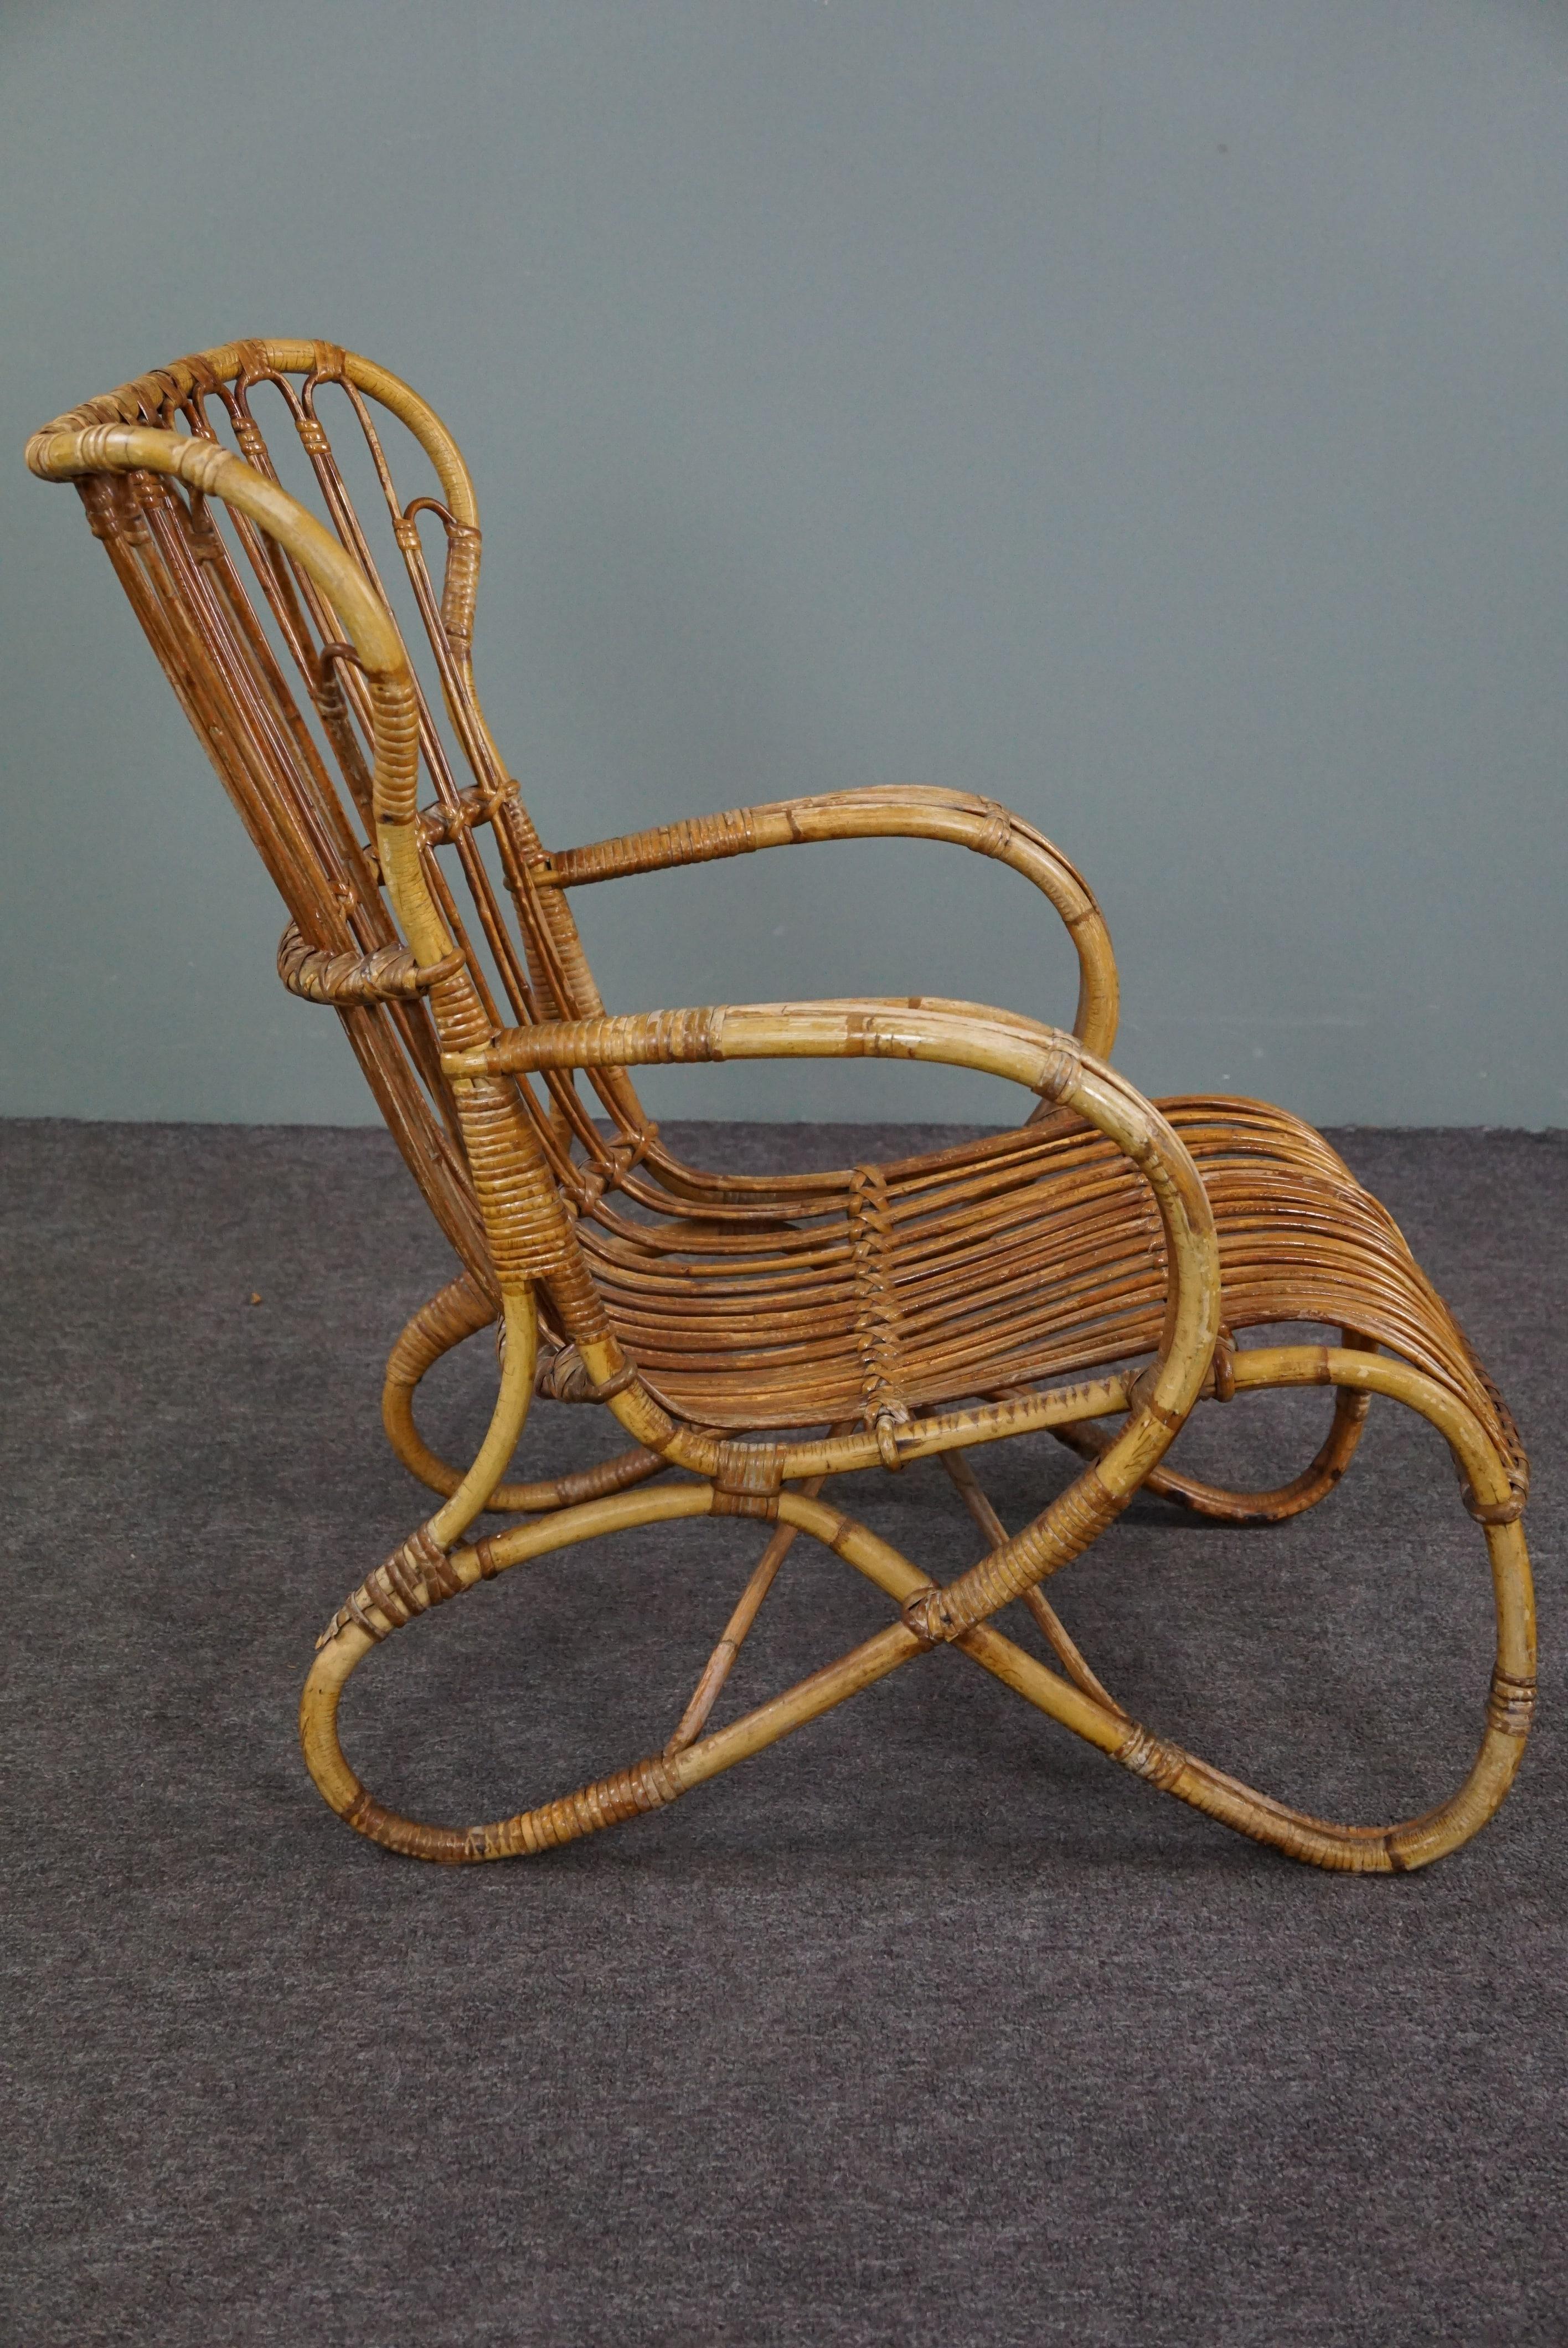 Hand-Crafted Rattan Belse 8 armchair with high back, Dutch Design, 1950 For Sale